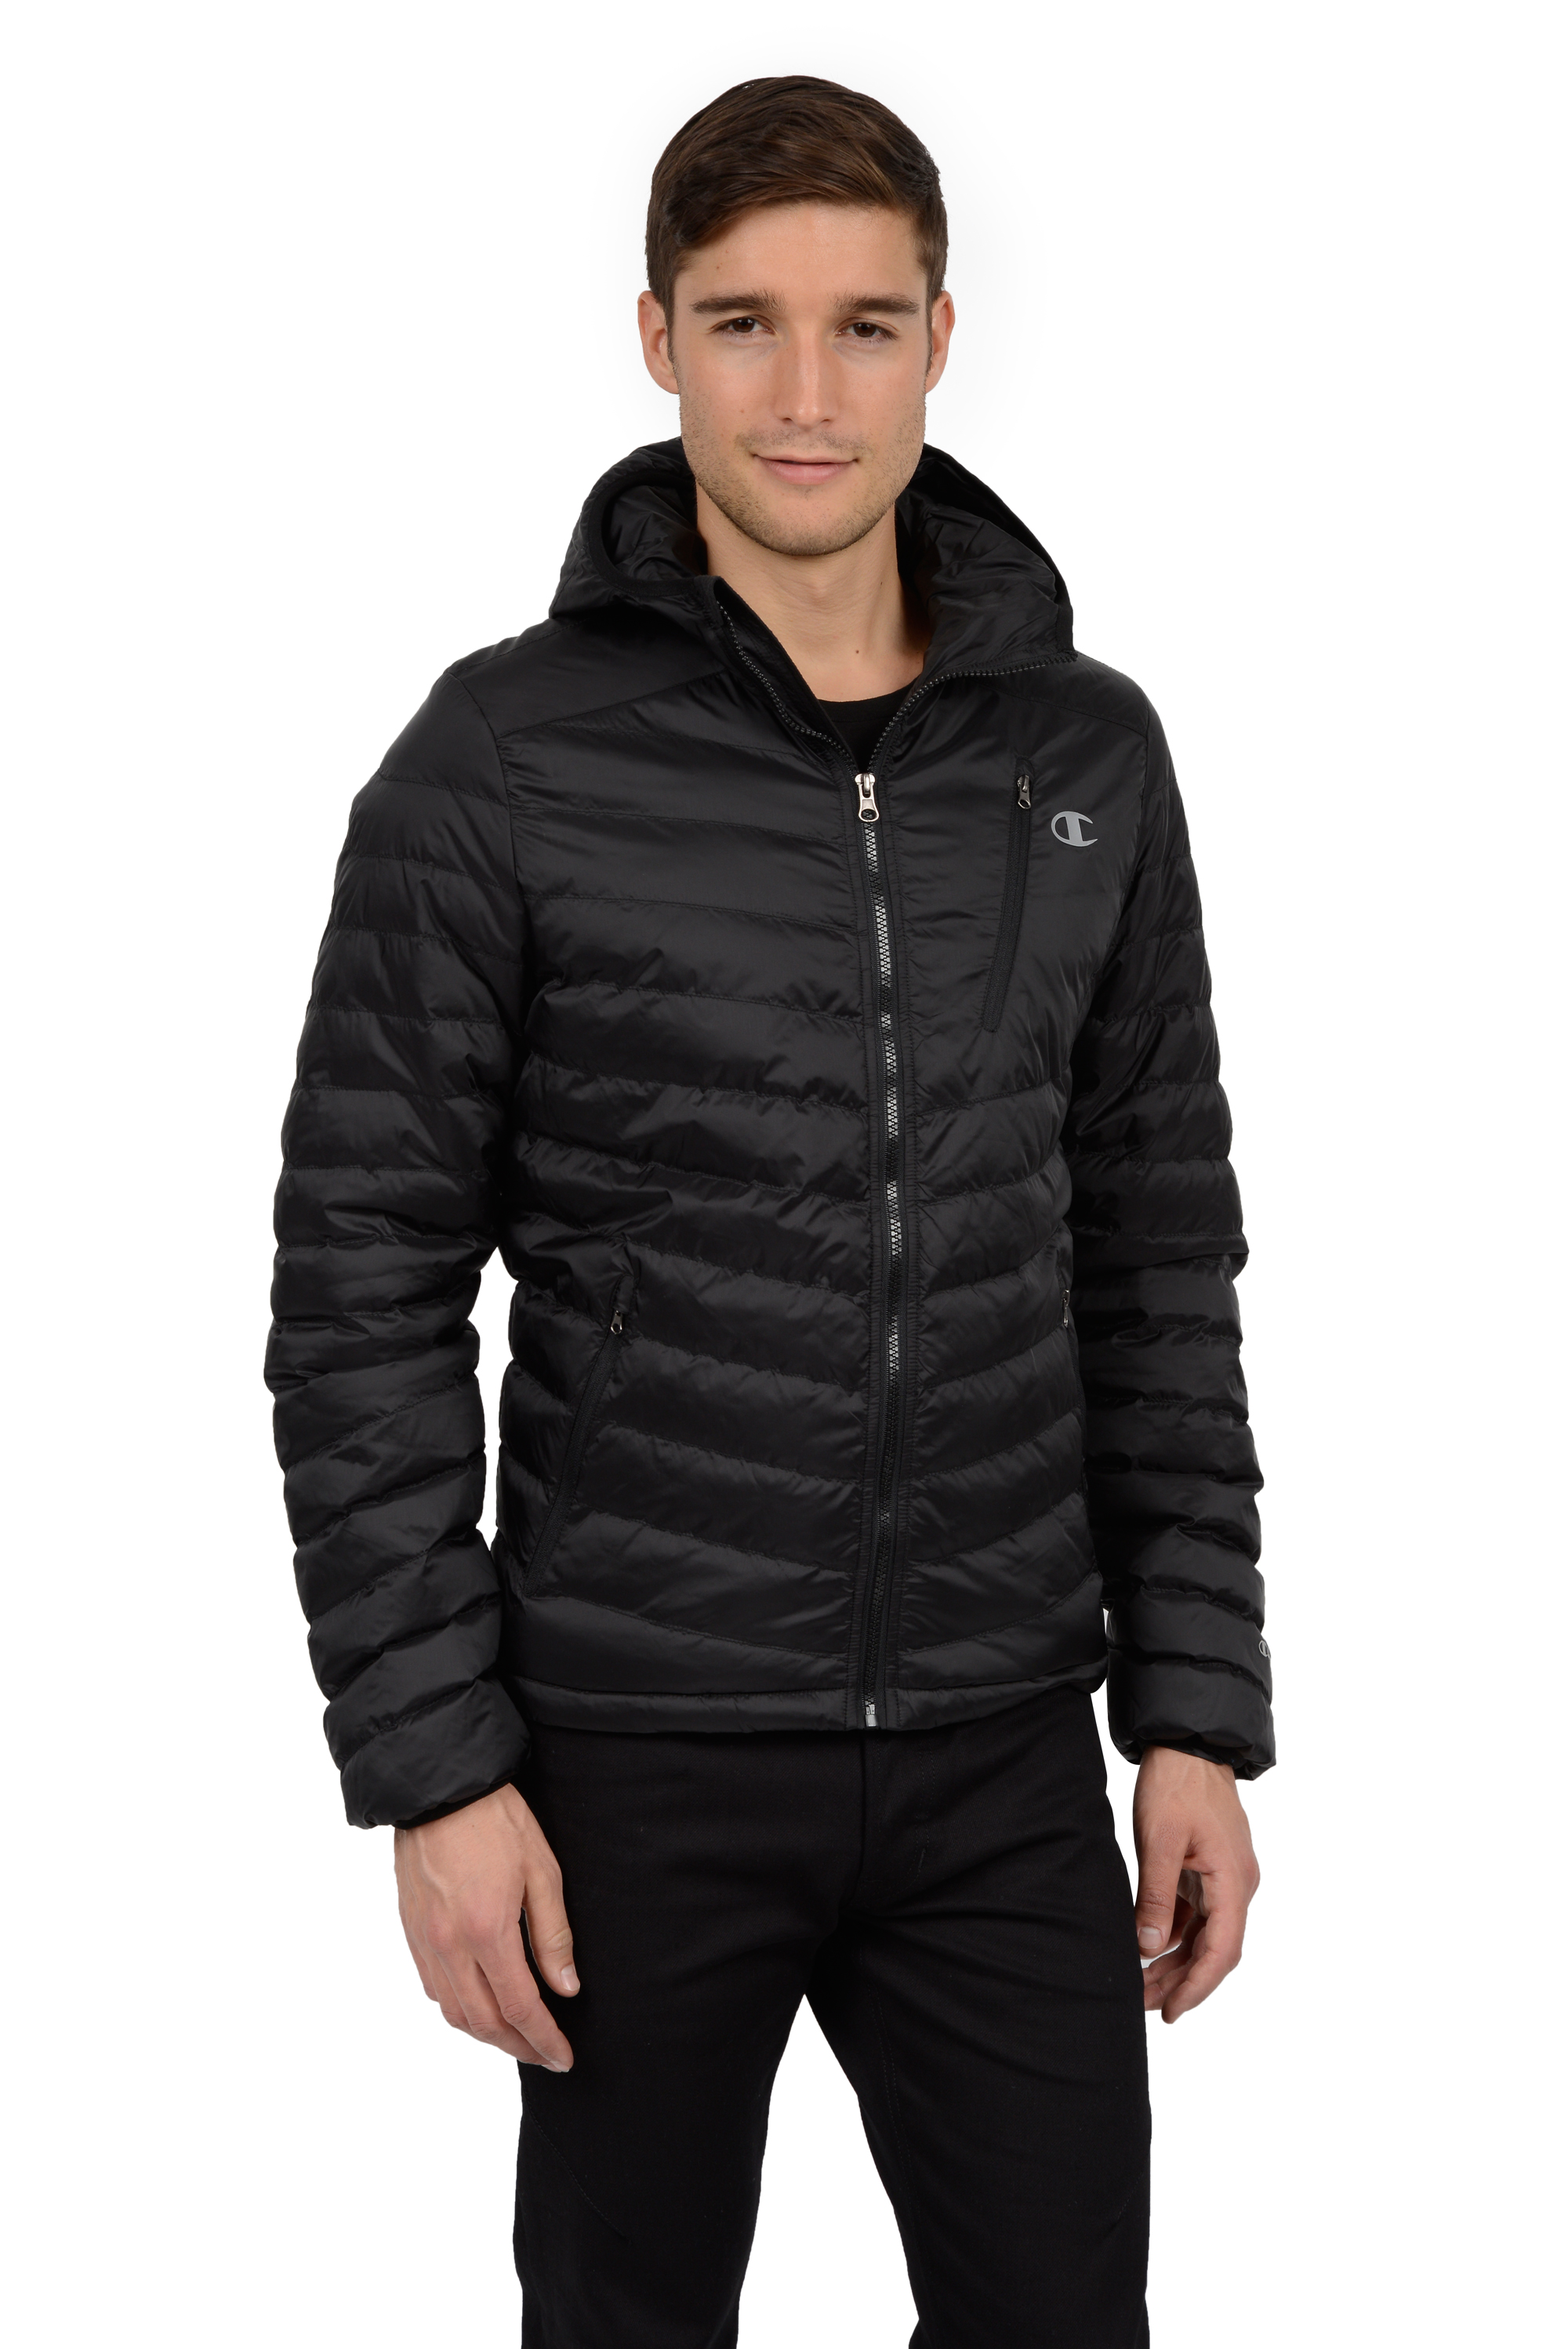 Champion Men's Big and Tall featherweight insulated jacket